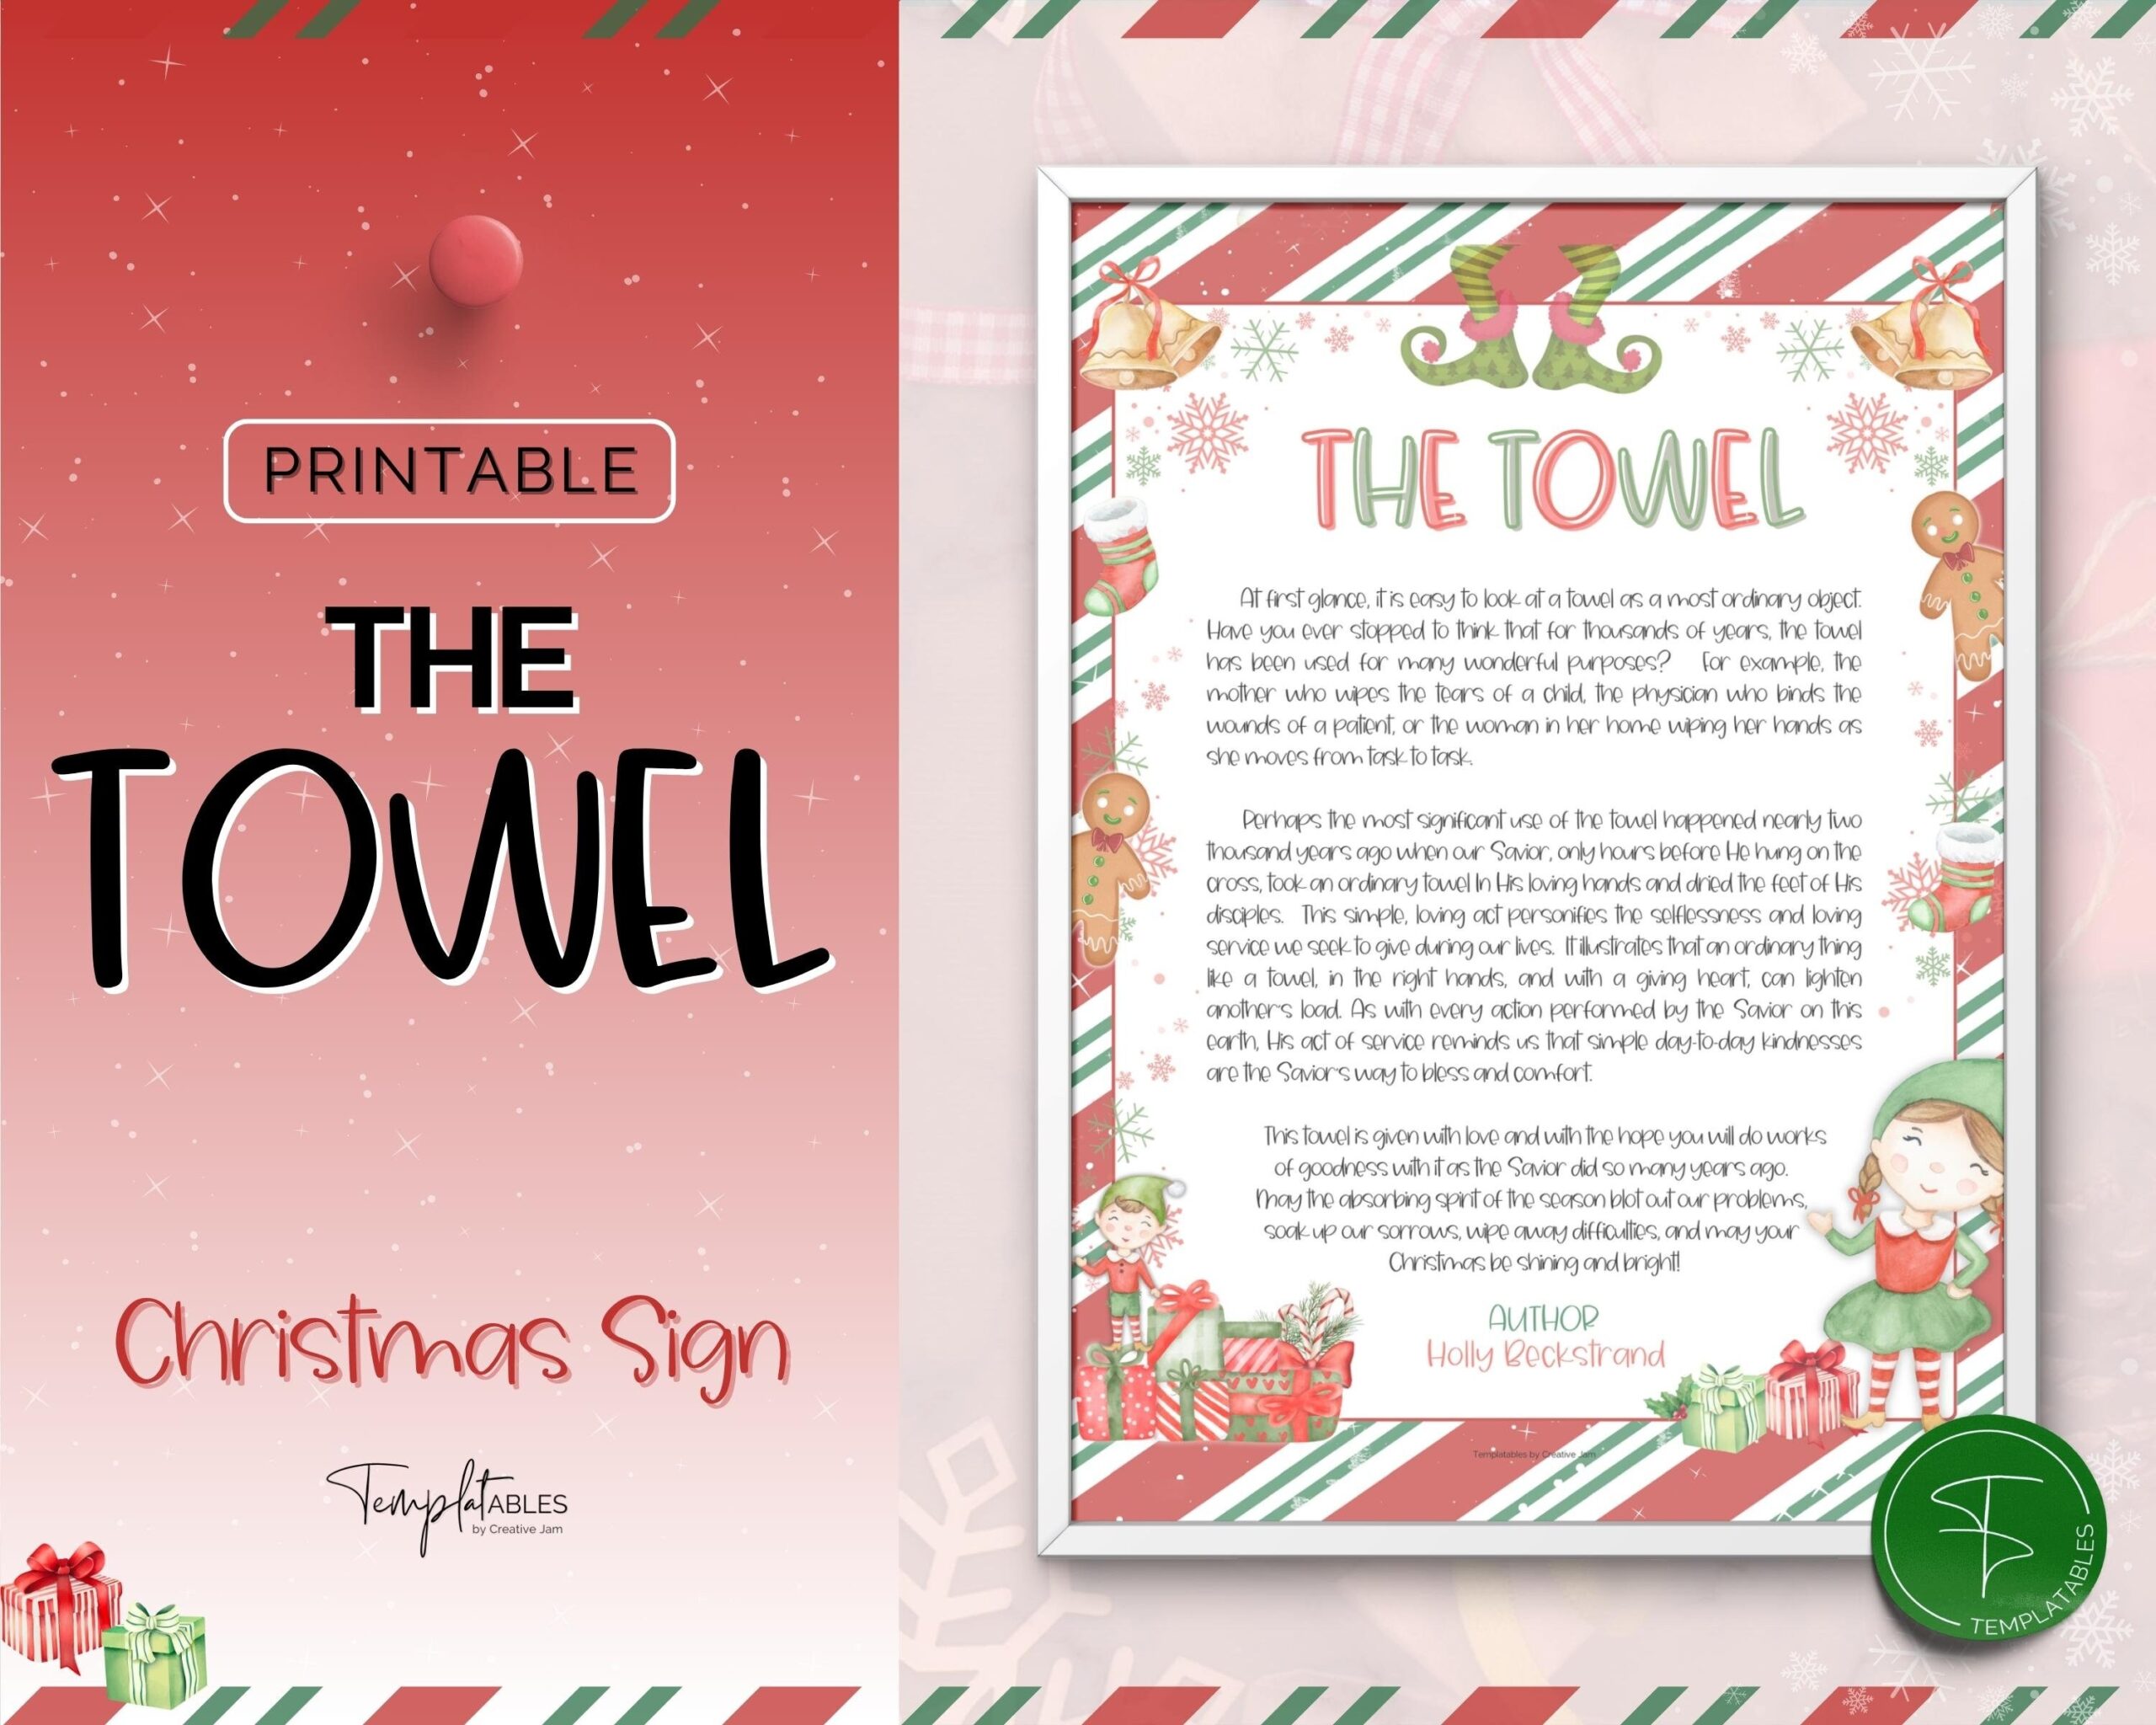 Christmas Towel Story Printable Christmas Story The Towel Poem Christian Gift Neighbor Religious Gift Festive Coworker Holiday Gift Etsy